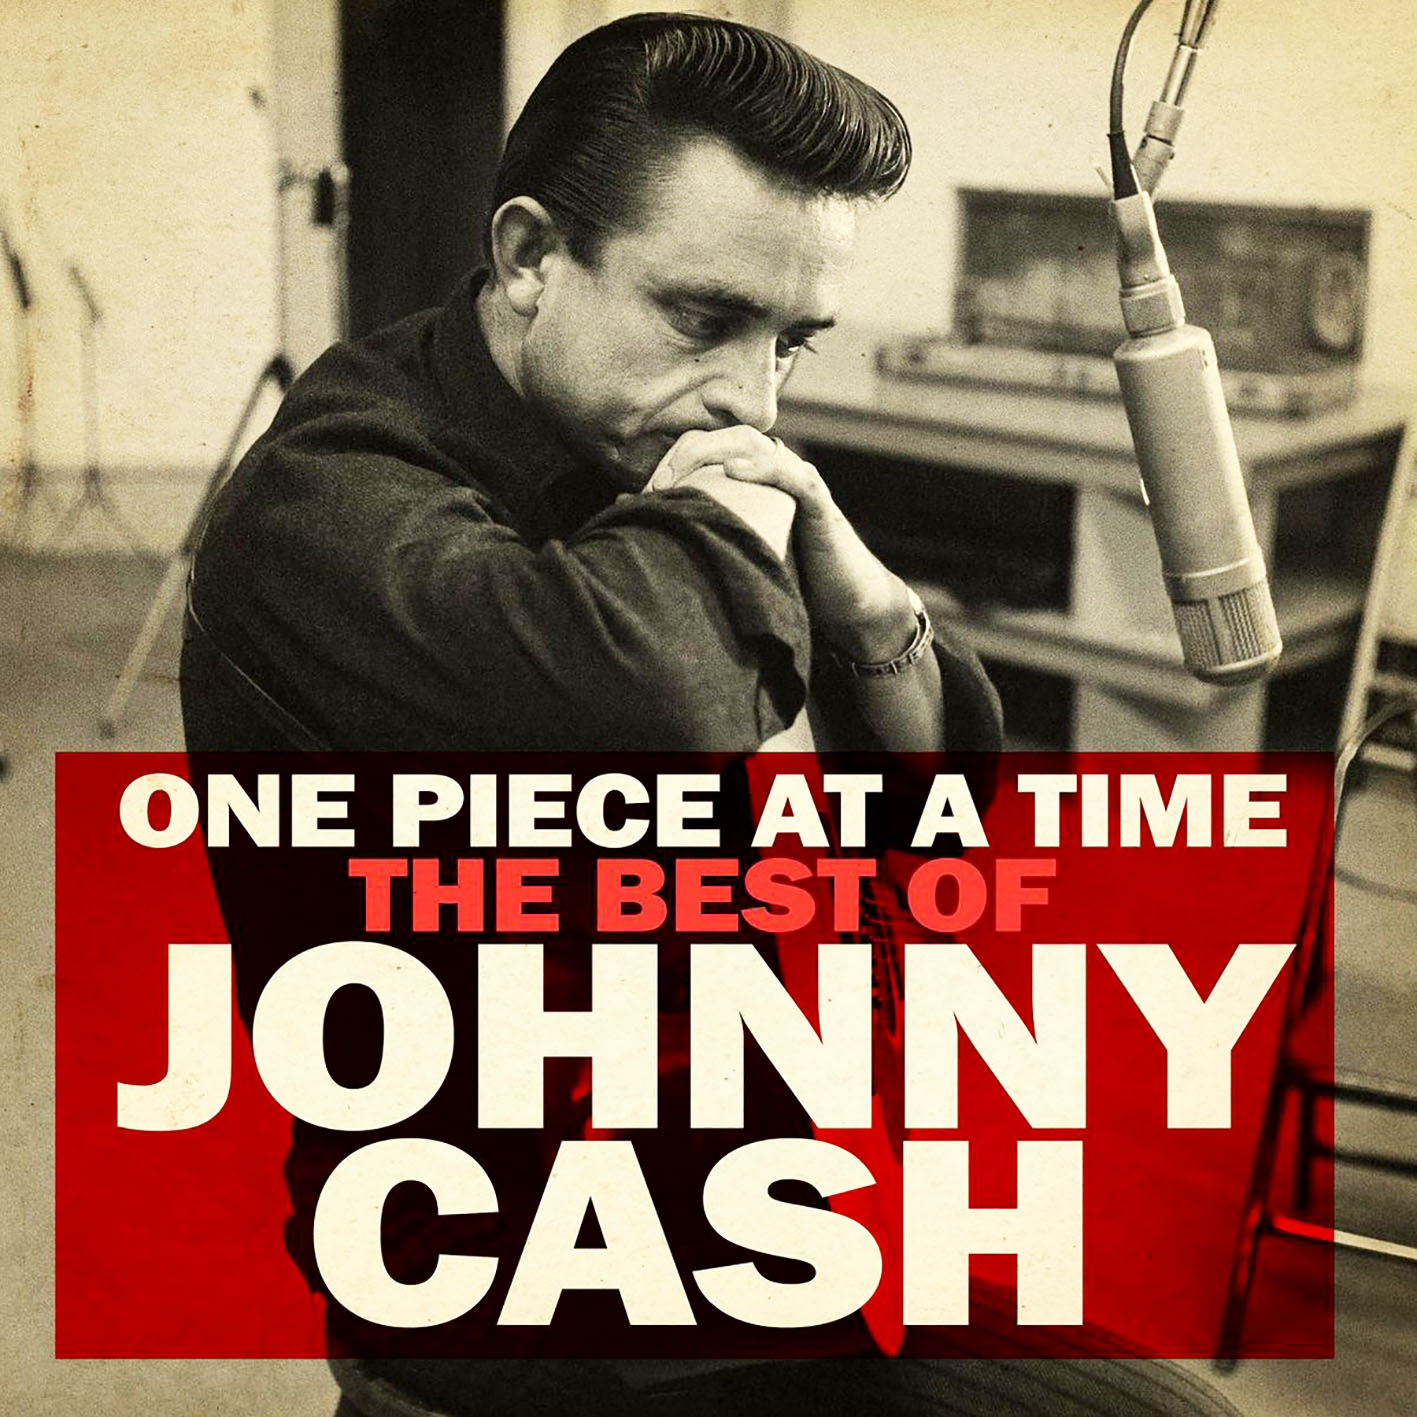 Johnny Cash - 2020 - One Piece At A Time The Best Of Johnny Cash (flac)